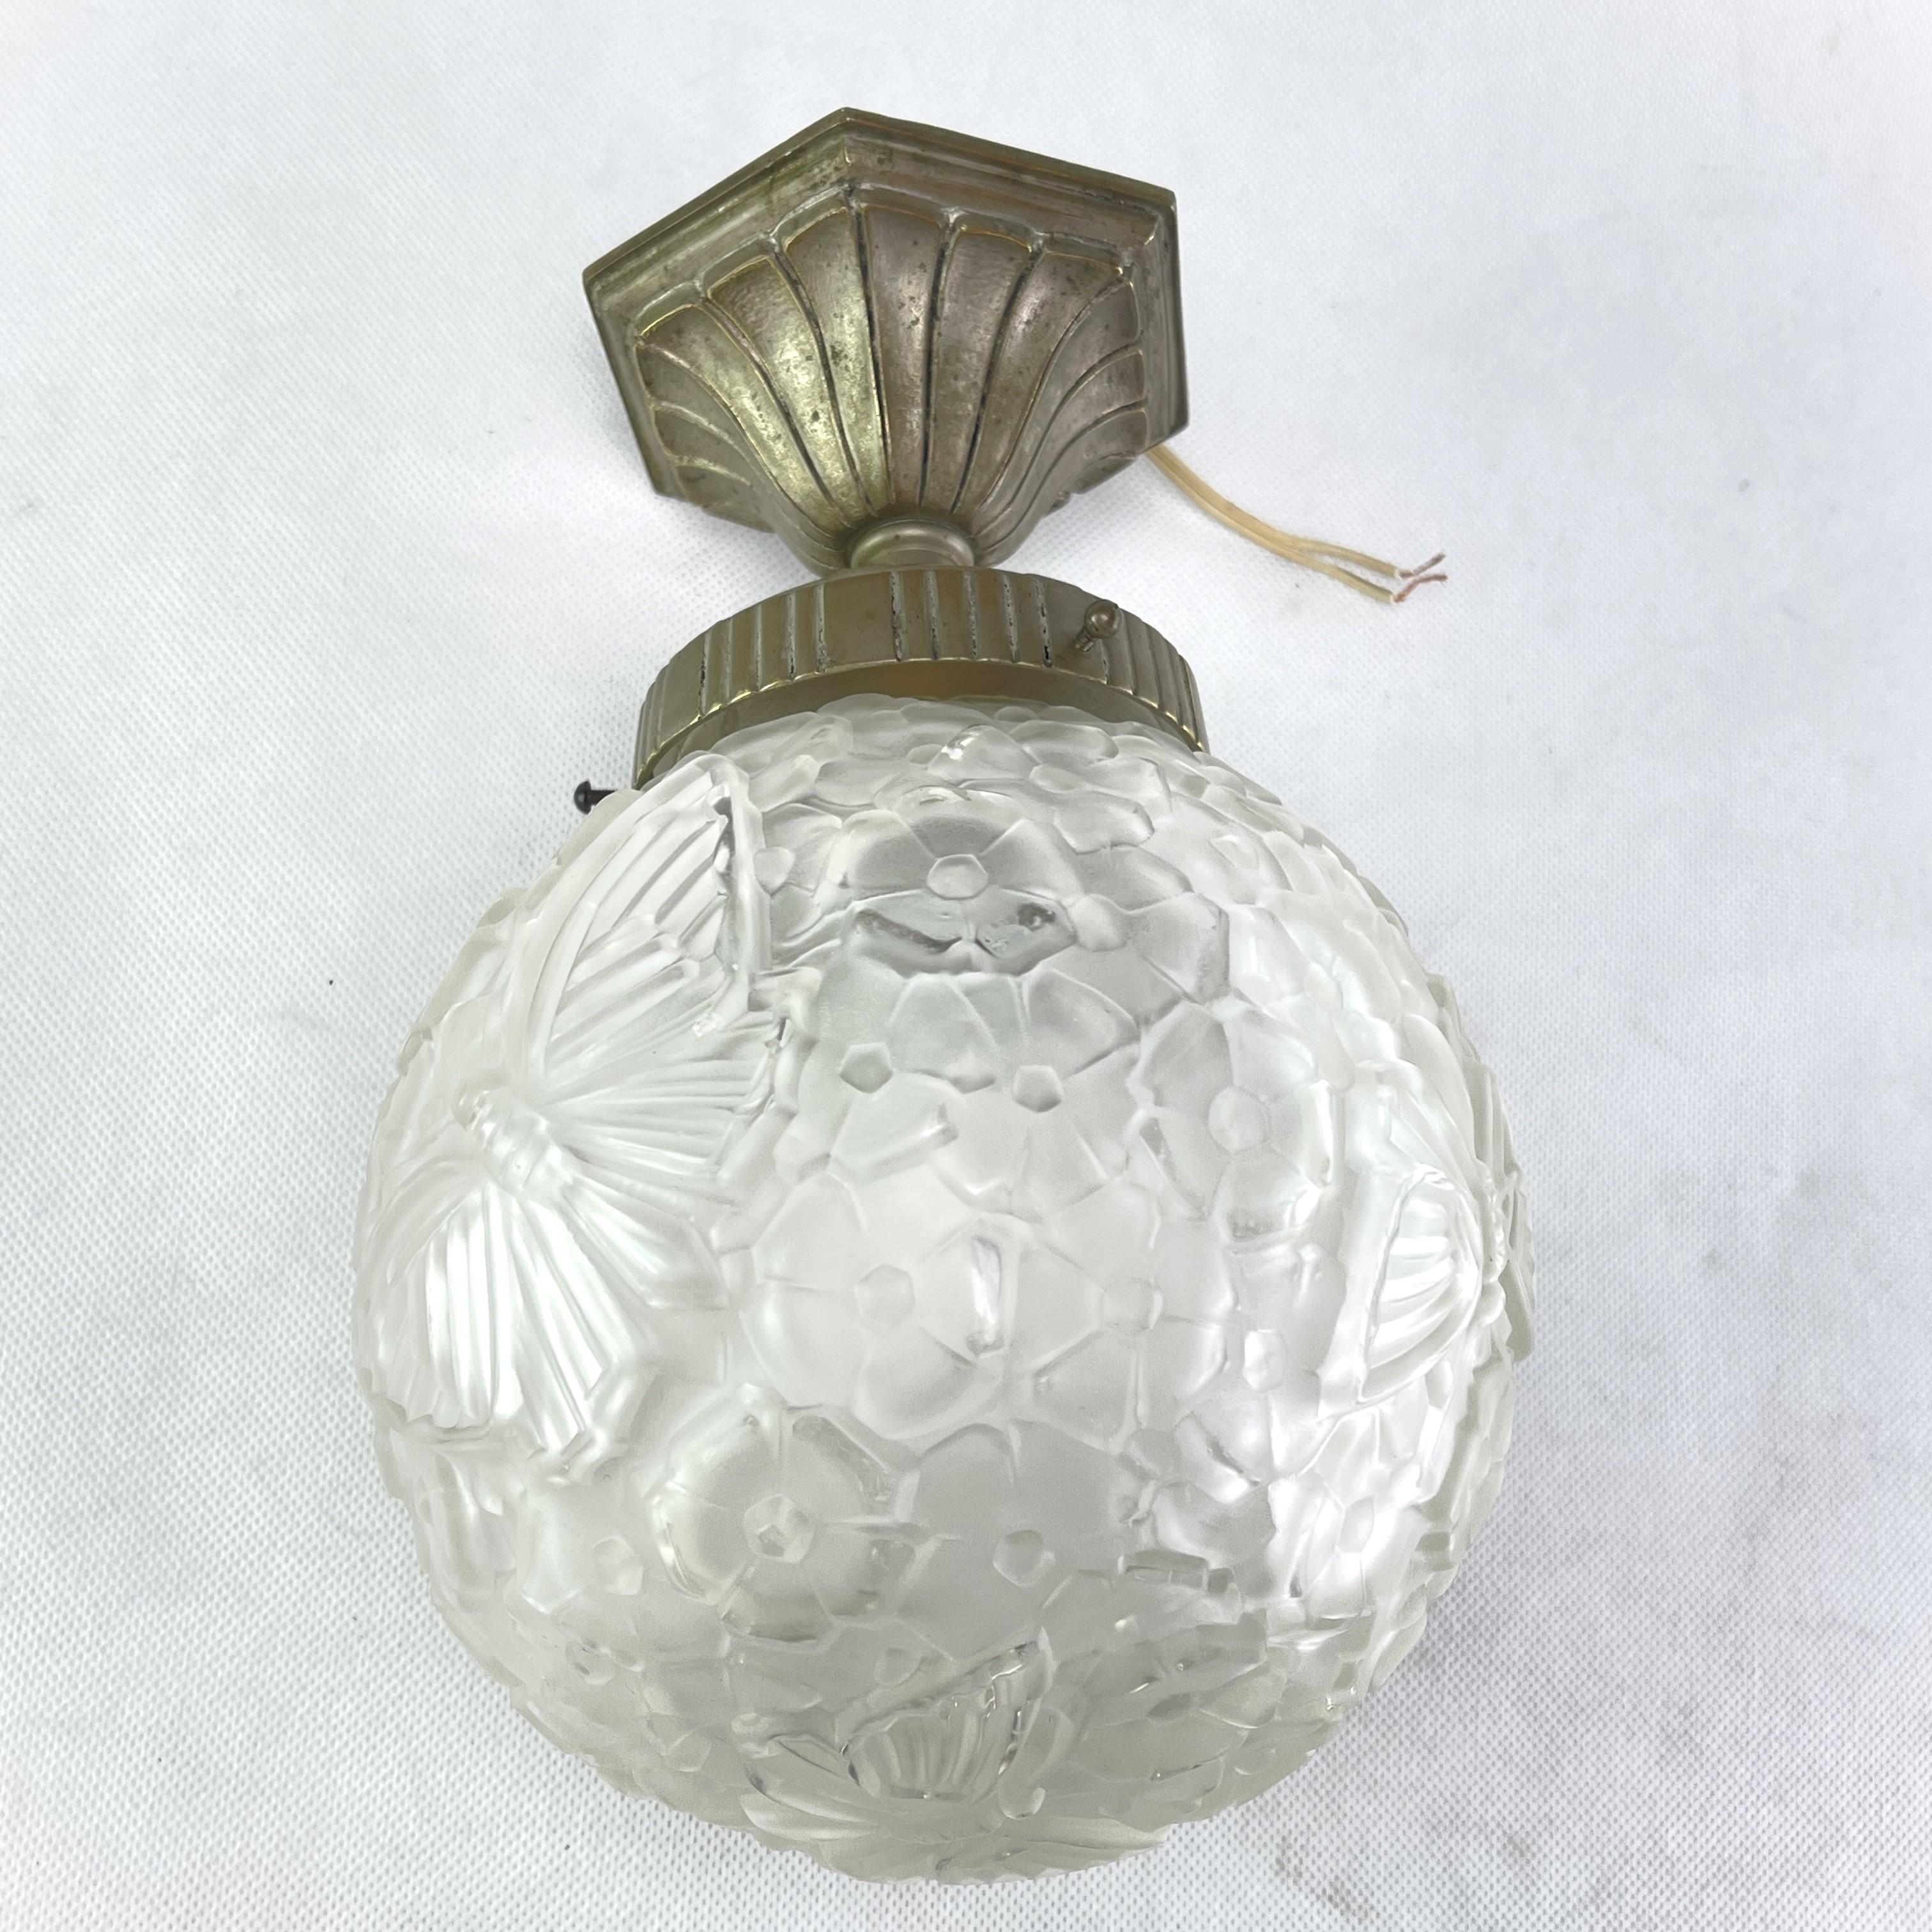 Art-Deco-Kronleuchter von Hettier & Vincent - 1930er Jahre

This rare, original ceiling lamp captivates with its simple and matter-of-fact Art Deco design. The lamp gives a very pleasant light. This globe lamp is an absolute design classic from the